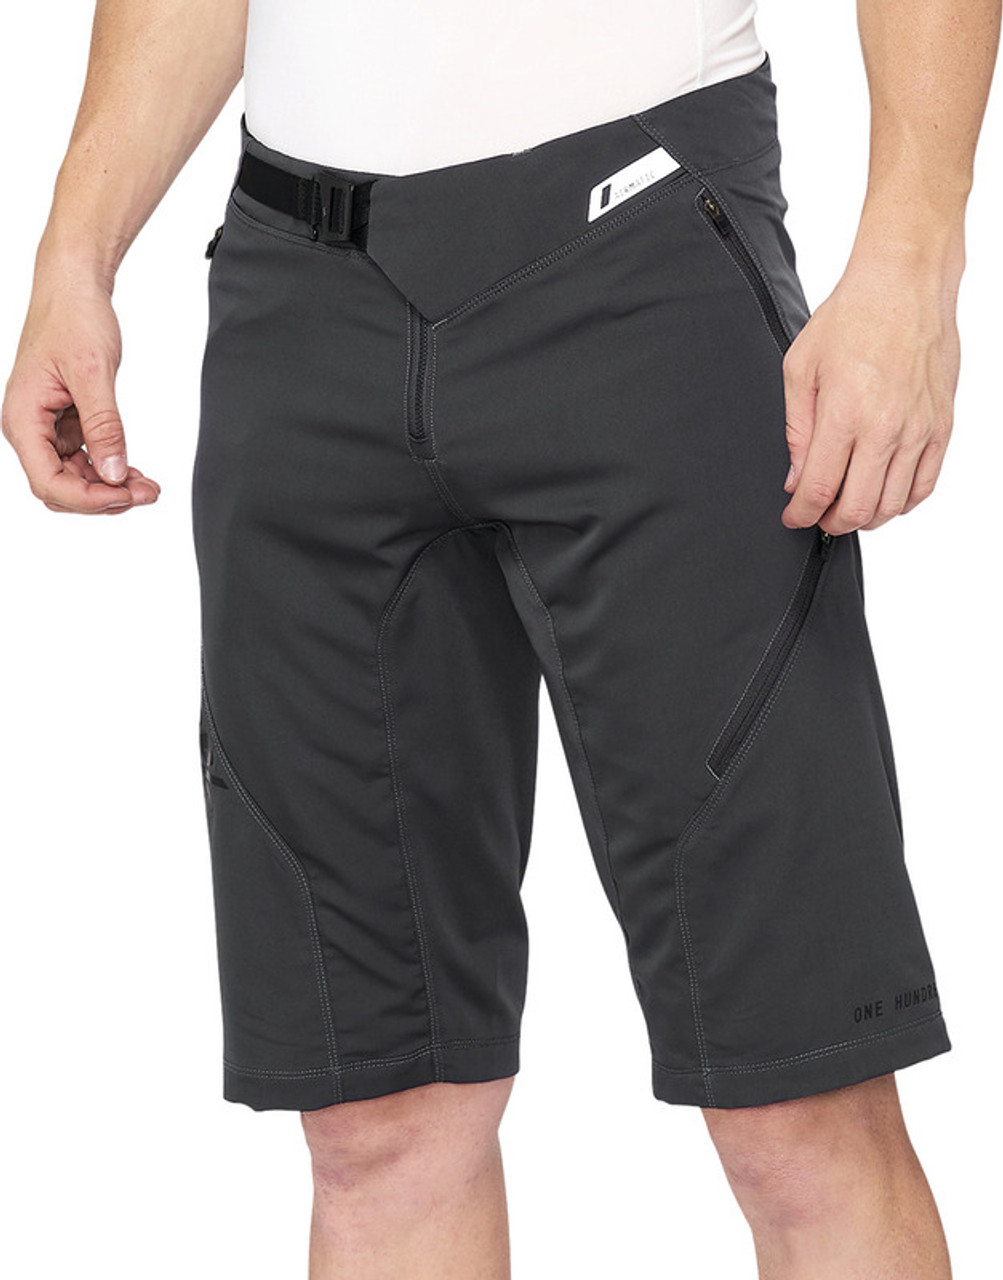 100% Airmatic Charcoal Shorts - Speed Addicts